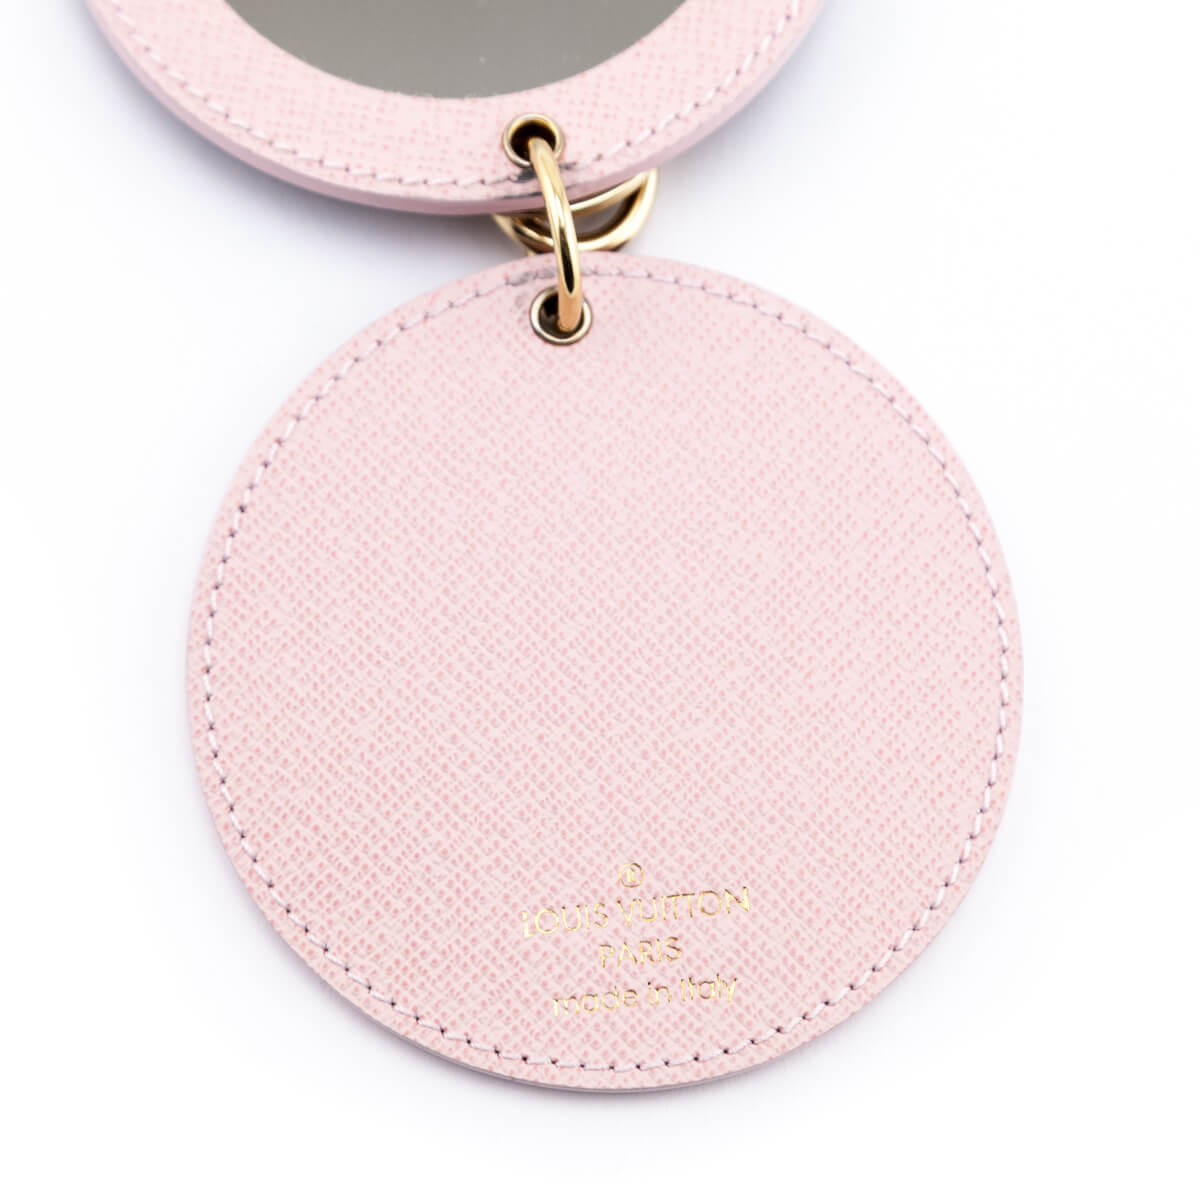 6 key holder in Monogram with the light pink interior Rose Ballerine   Girly car accessories, Cute car accessories, Louis vuitton key holder